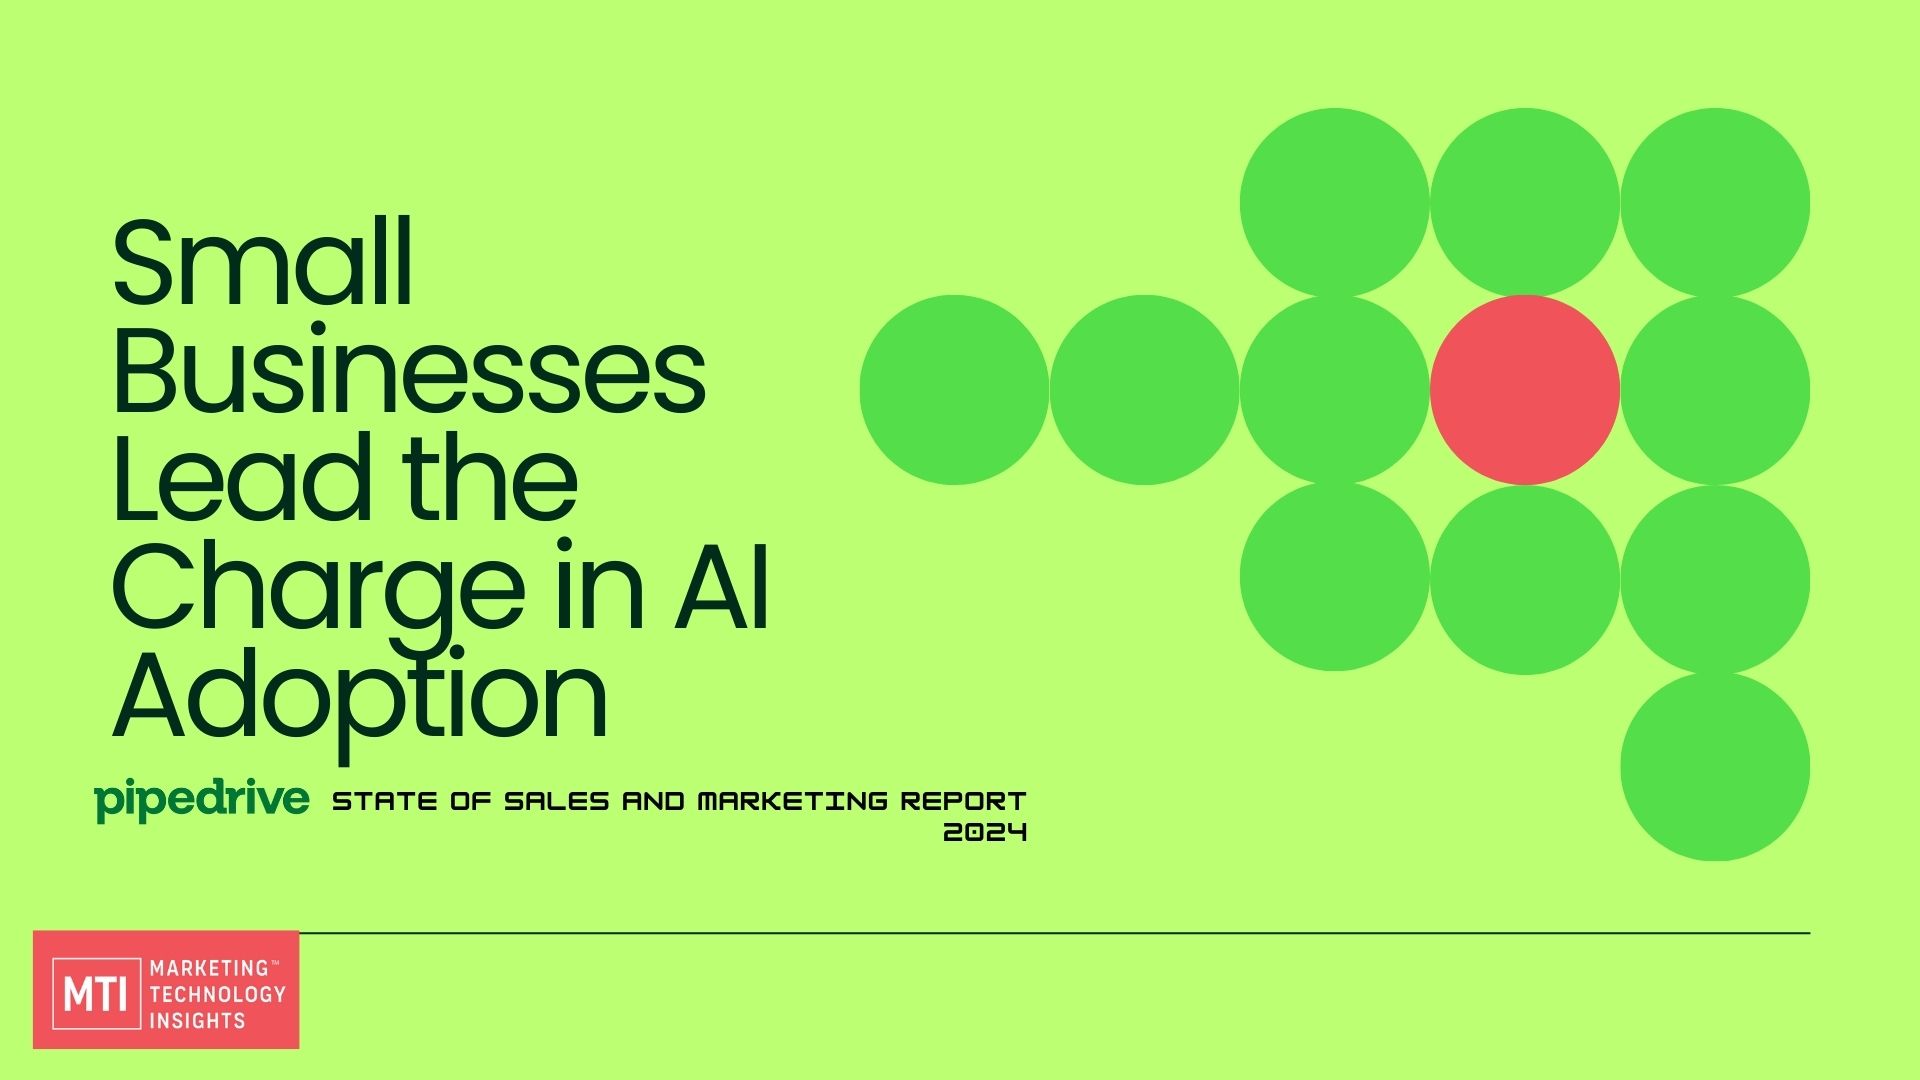 Small Businesses Lead the Charge in AI Adoption, According to Pipedrive’s State of Sales and Marketing Report